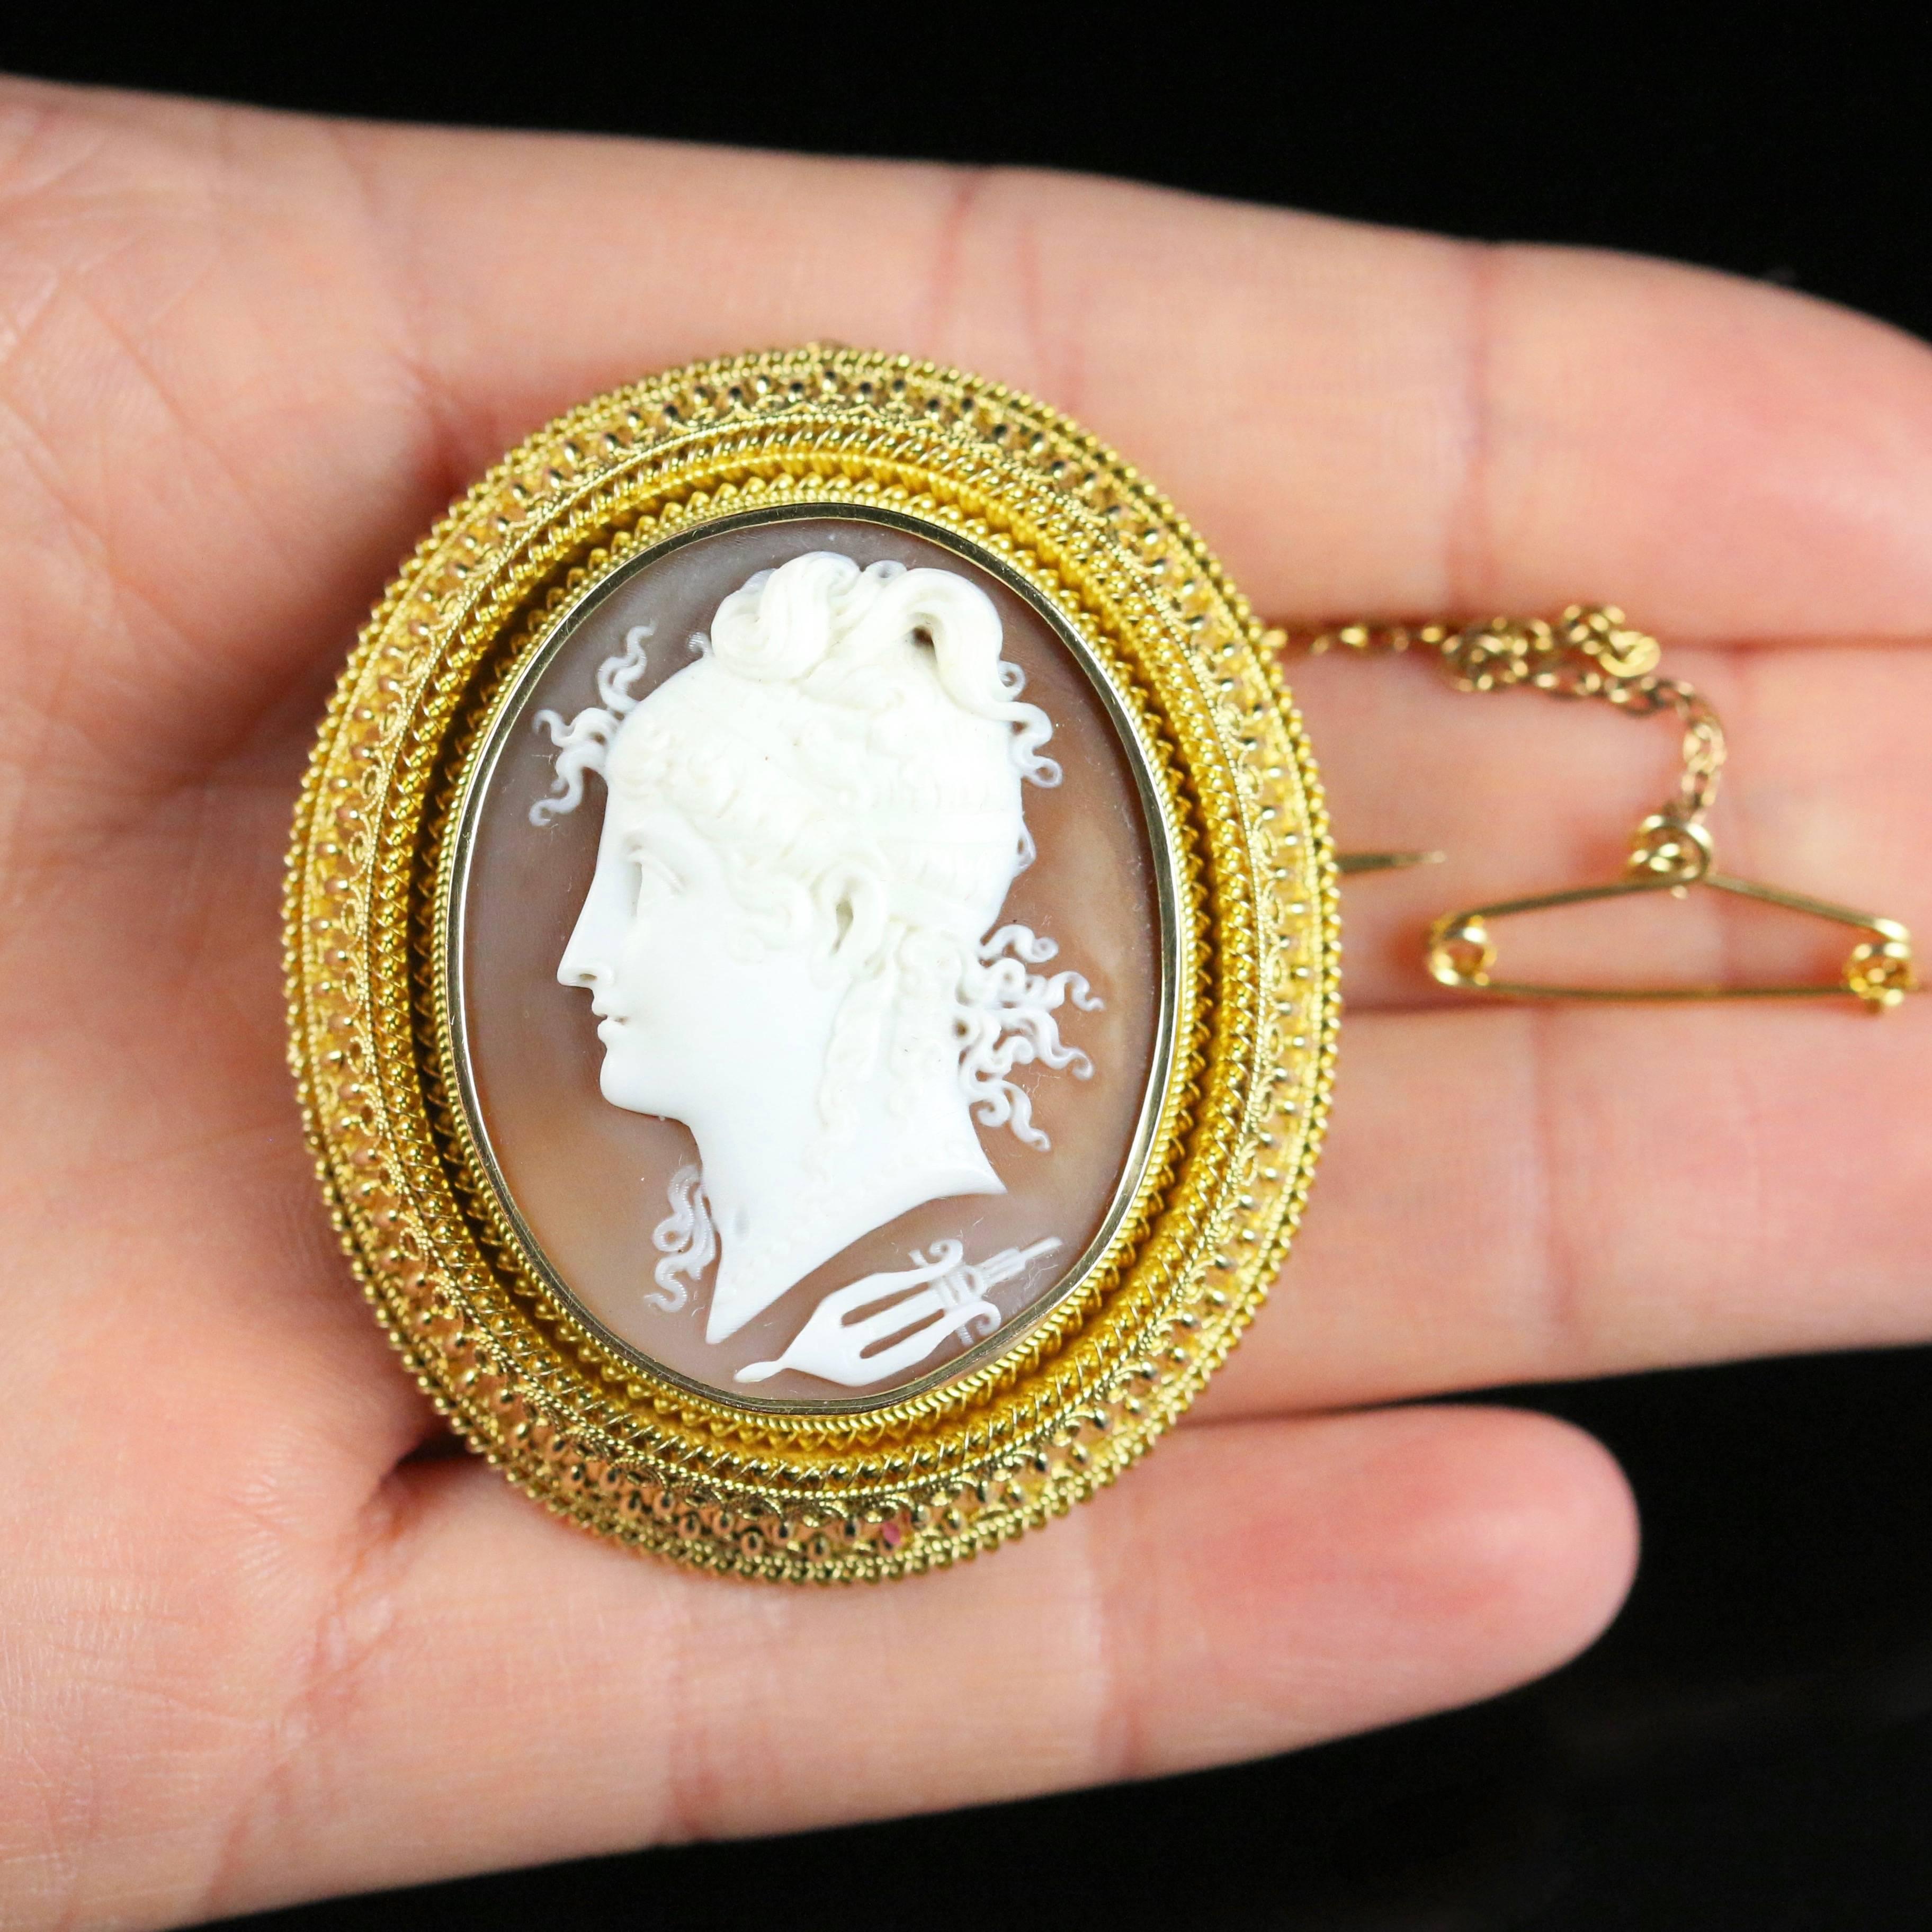 Antique Gold Cameo Brooch with Locket Back circa 1860 2